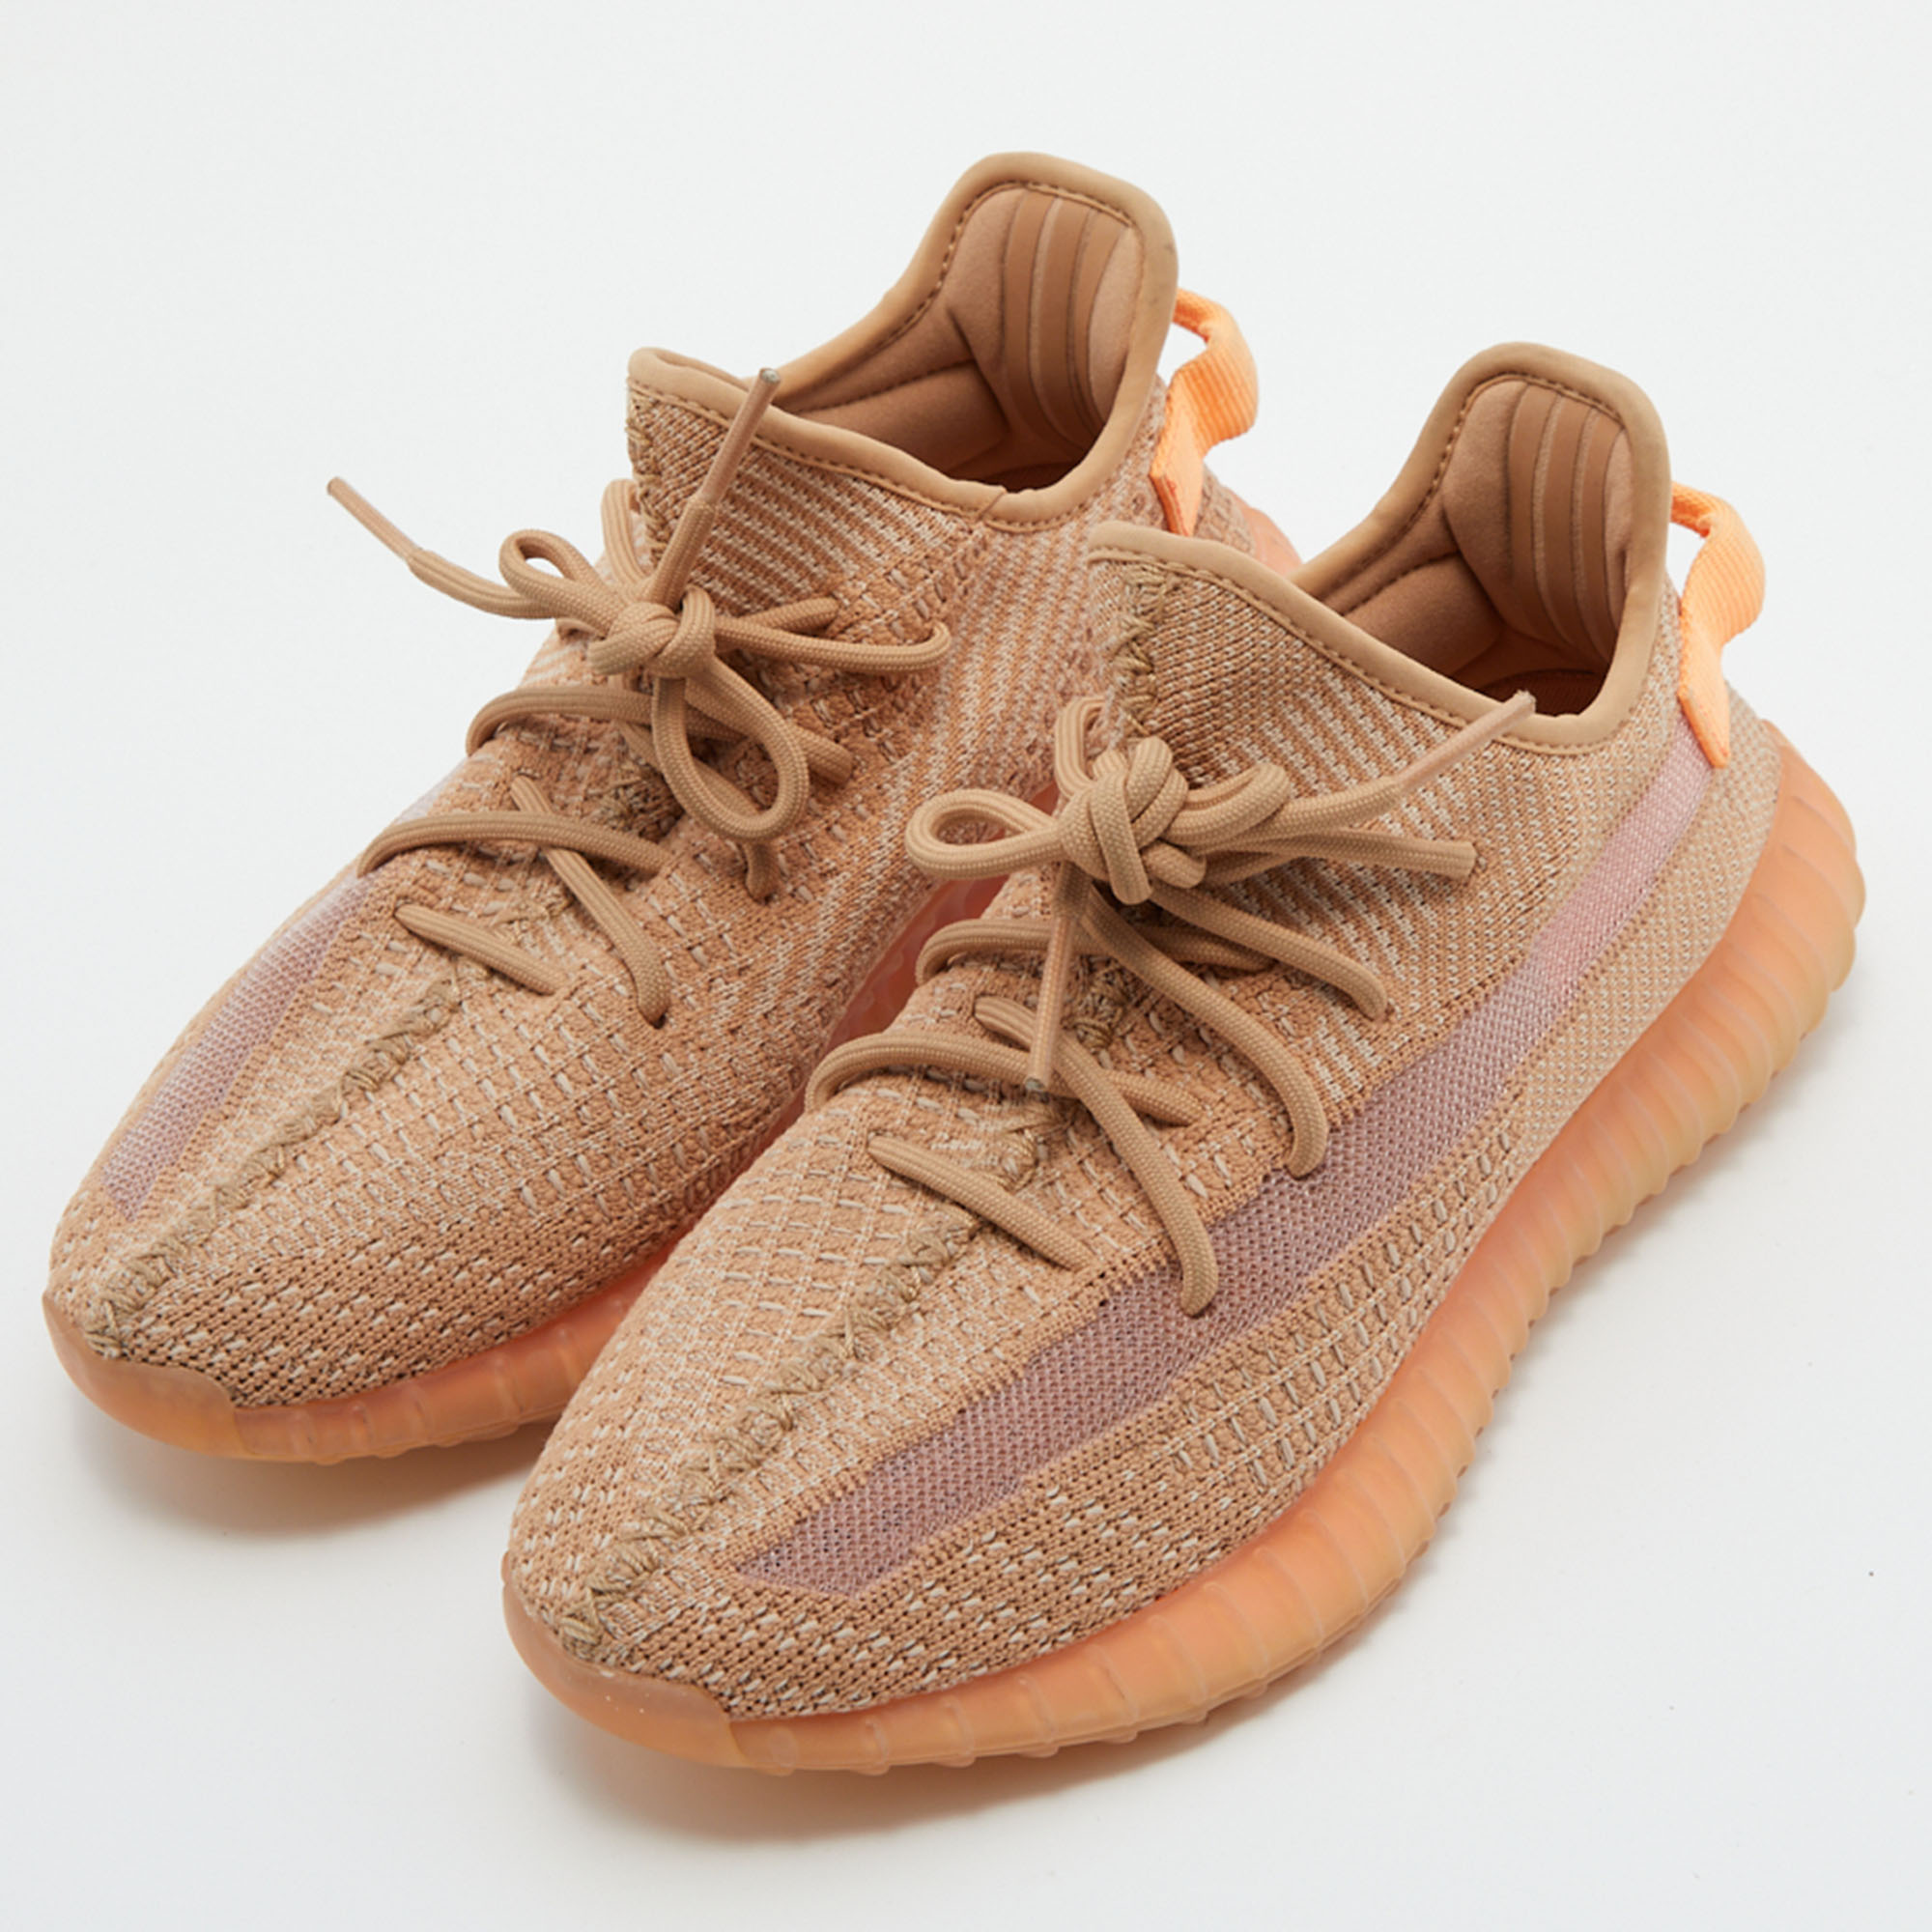 

Yeezy x Adidas Orange Knit Fabric Boost 350 V2 Clay Sneakers Size 40 2/3